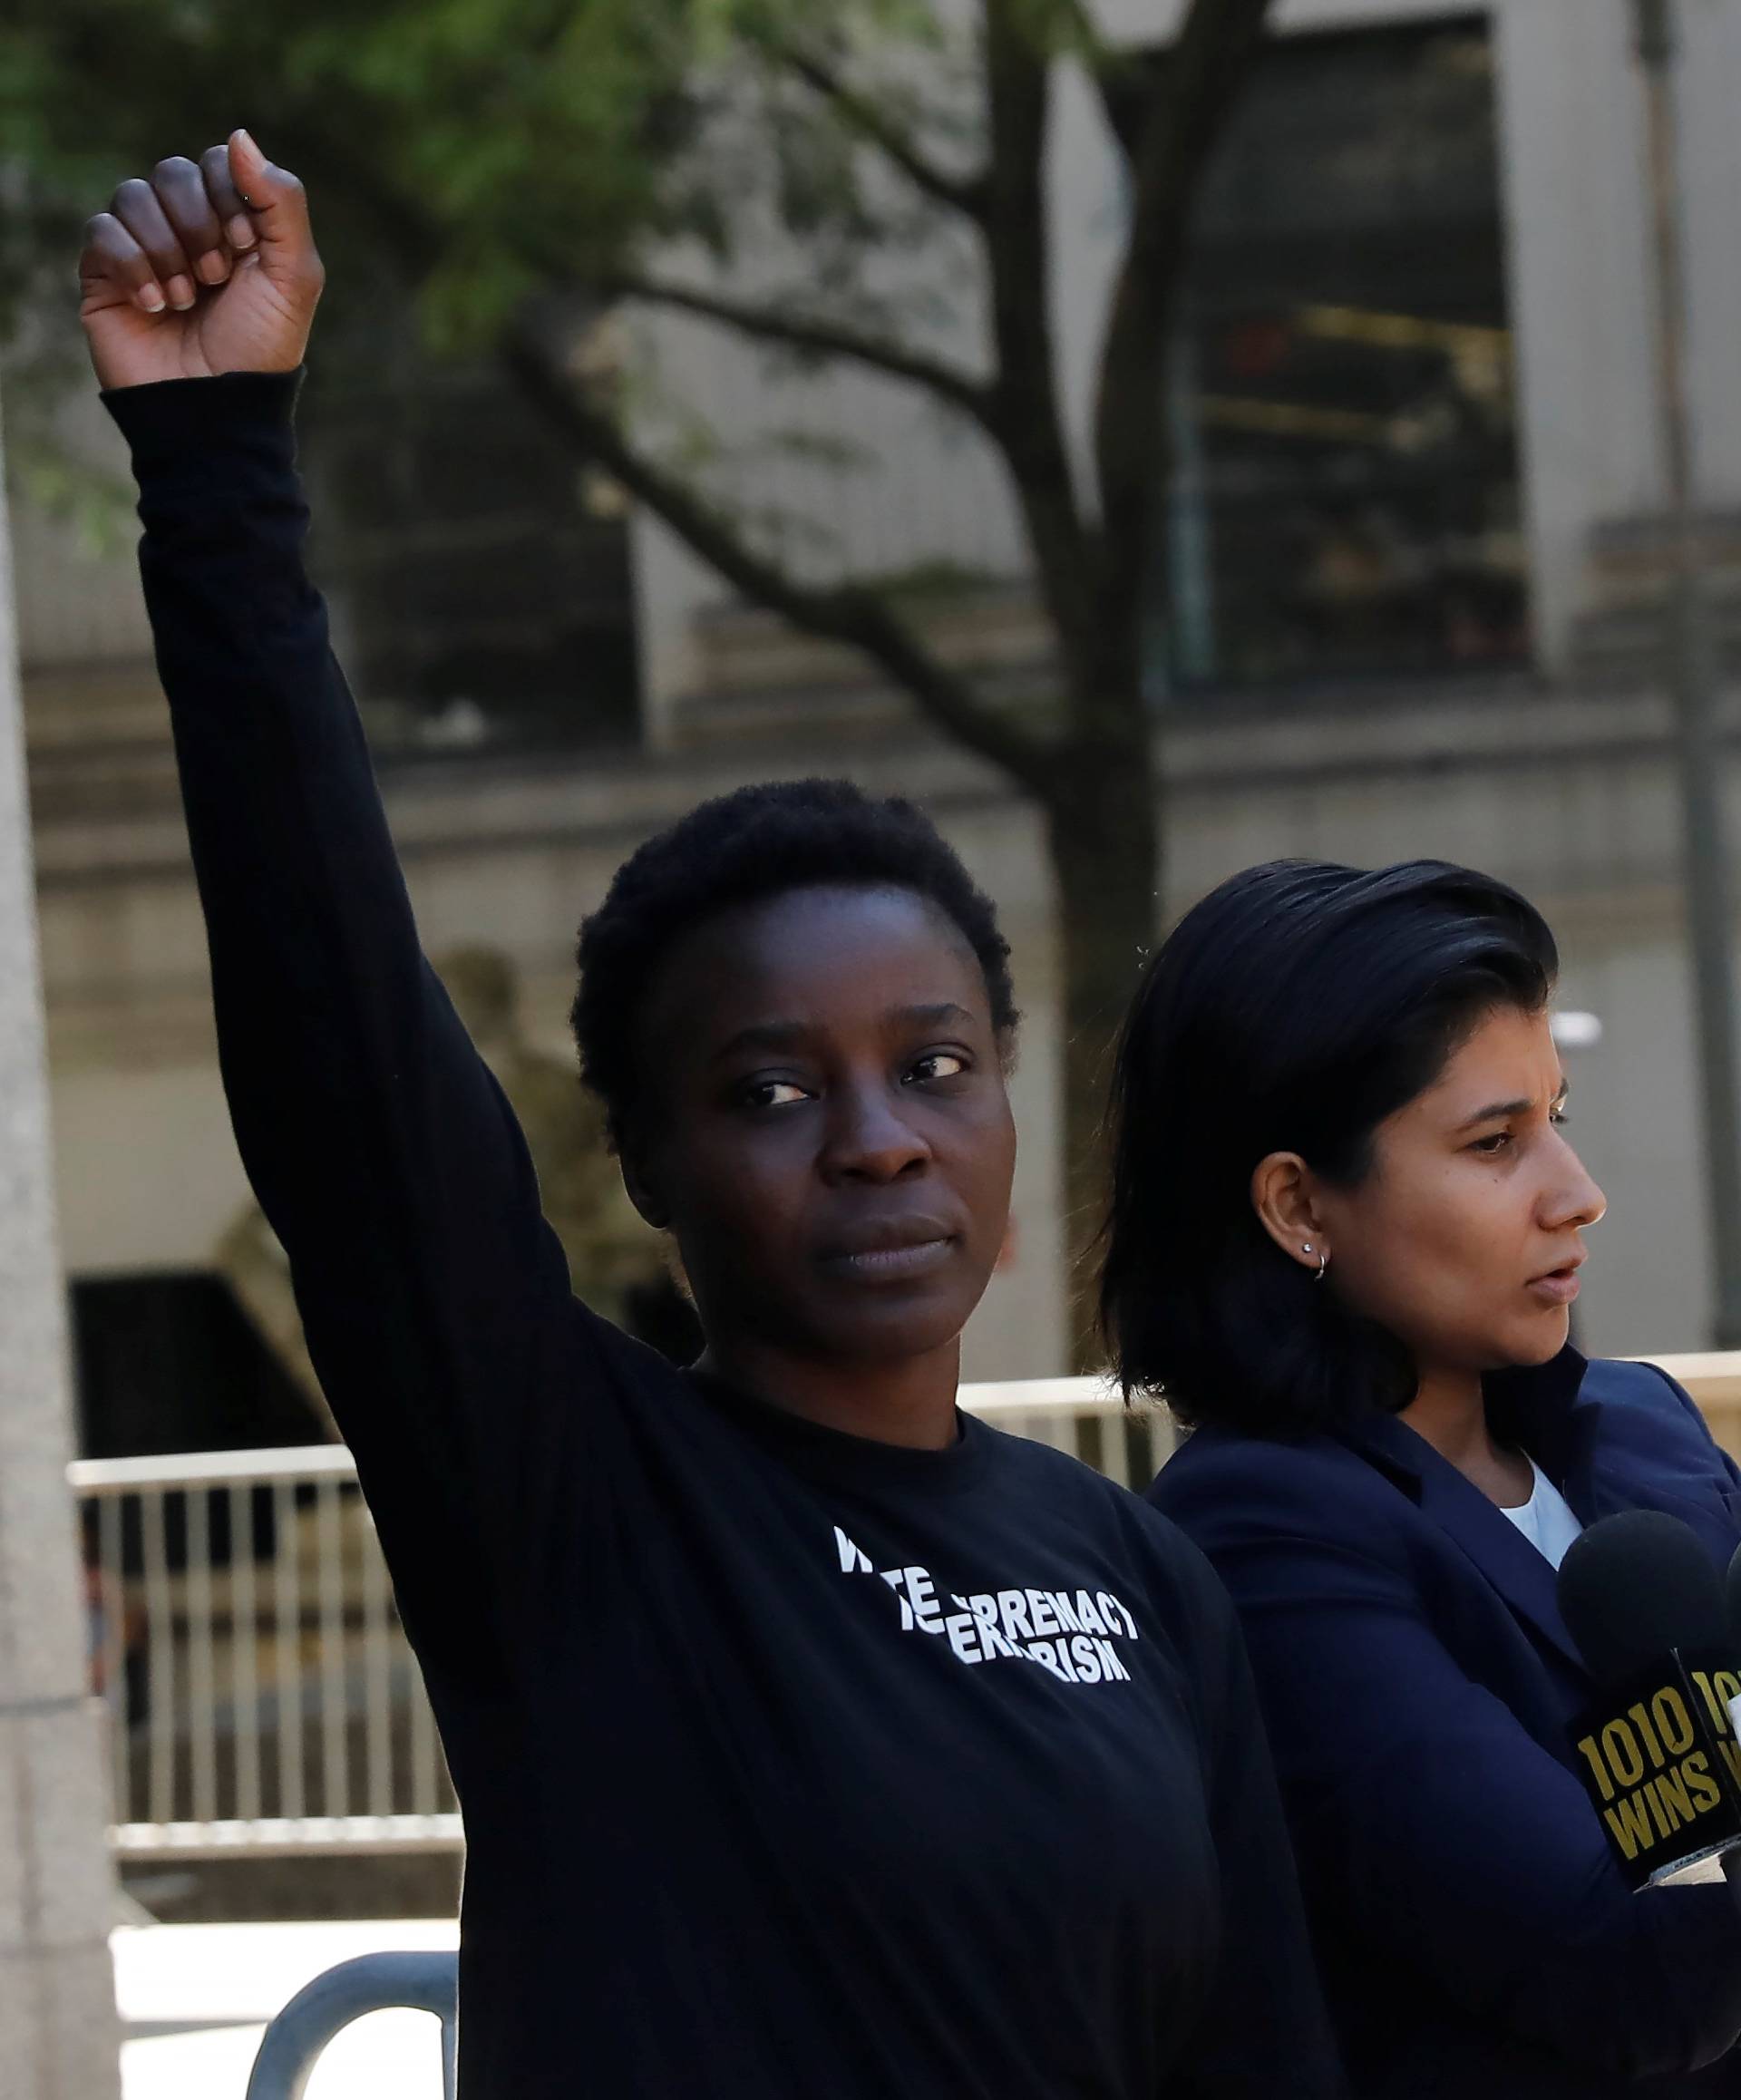 Patricia Okoumou raises her hand in the air after leaving federal court from her arraignment, a day after authorities say she scaled the stone pedestal of the Statue of Liberty to protest U.S. immigration policy, and speaking to the media in Manhattan